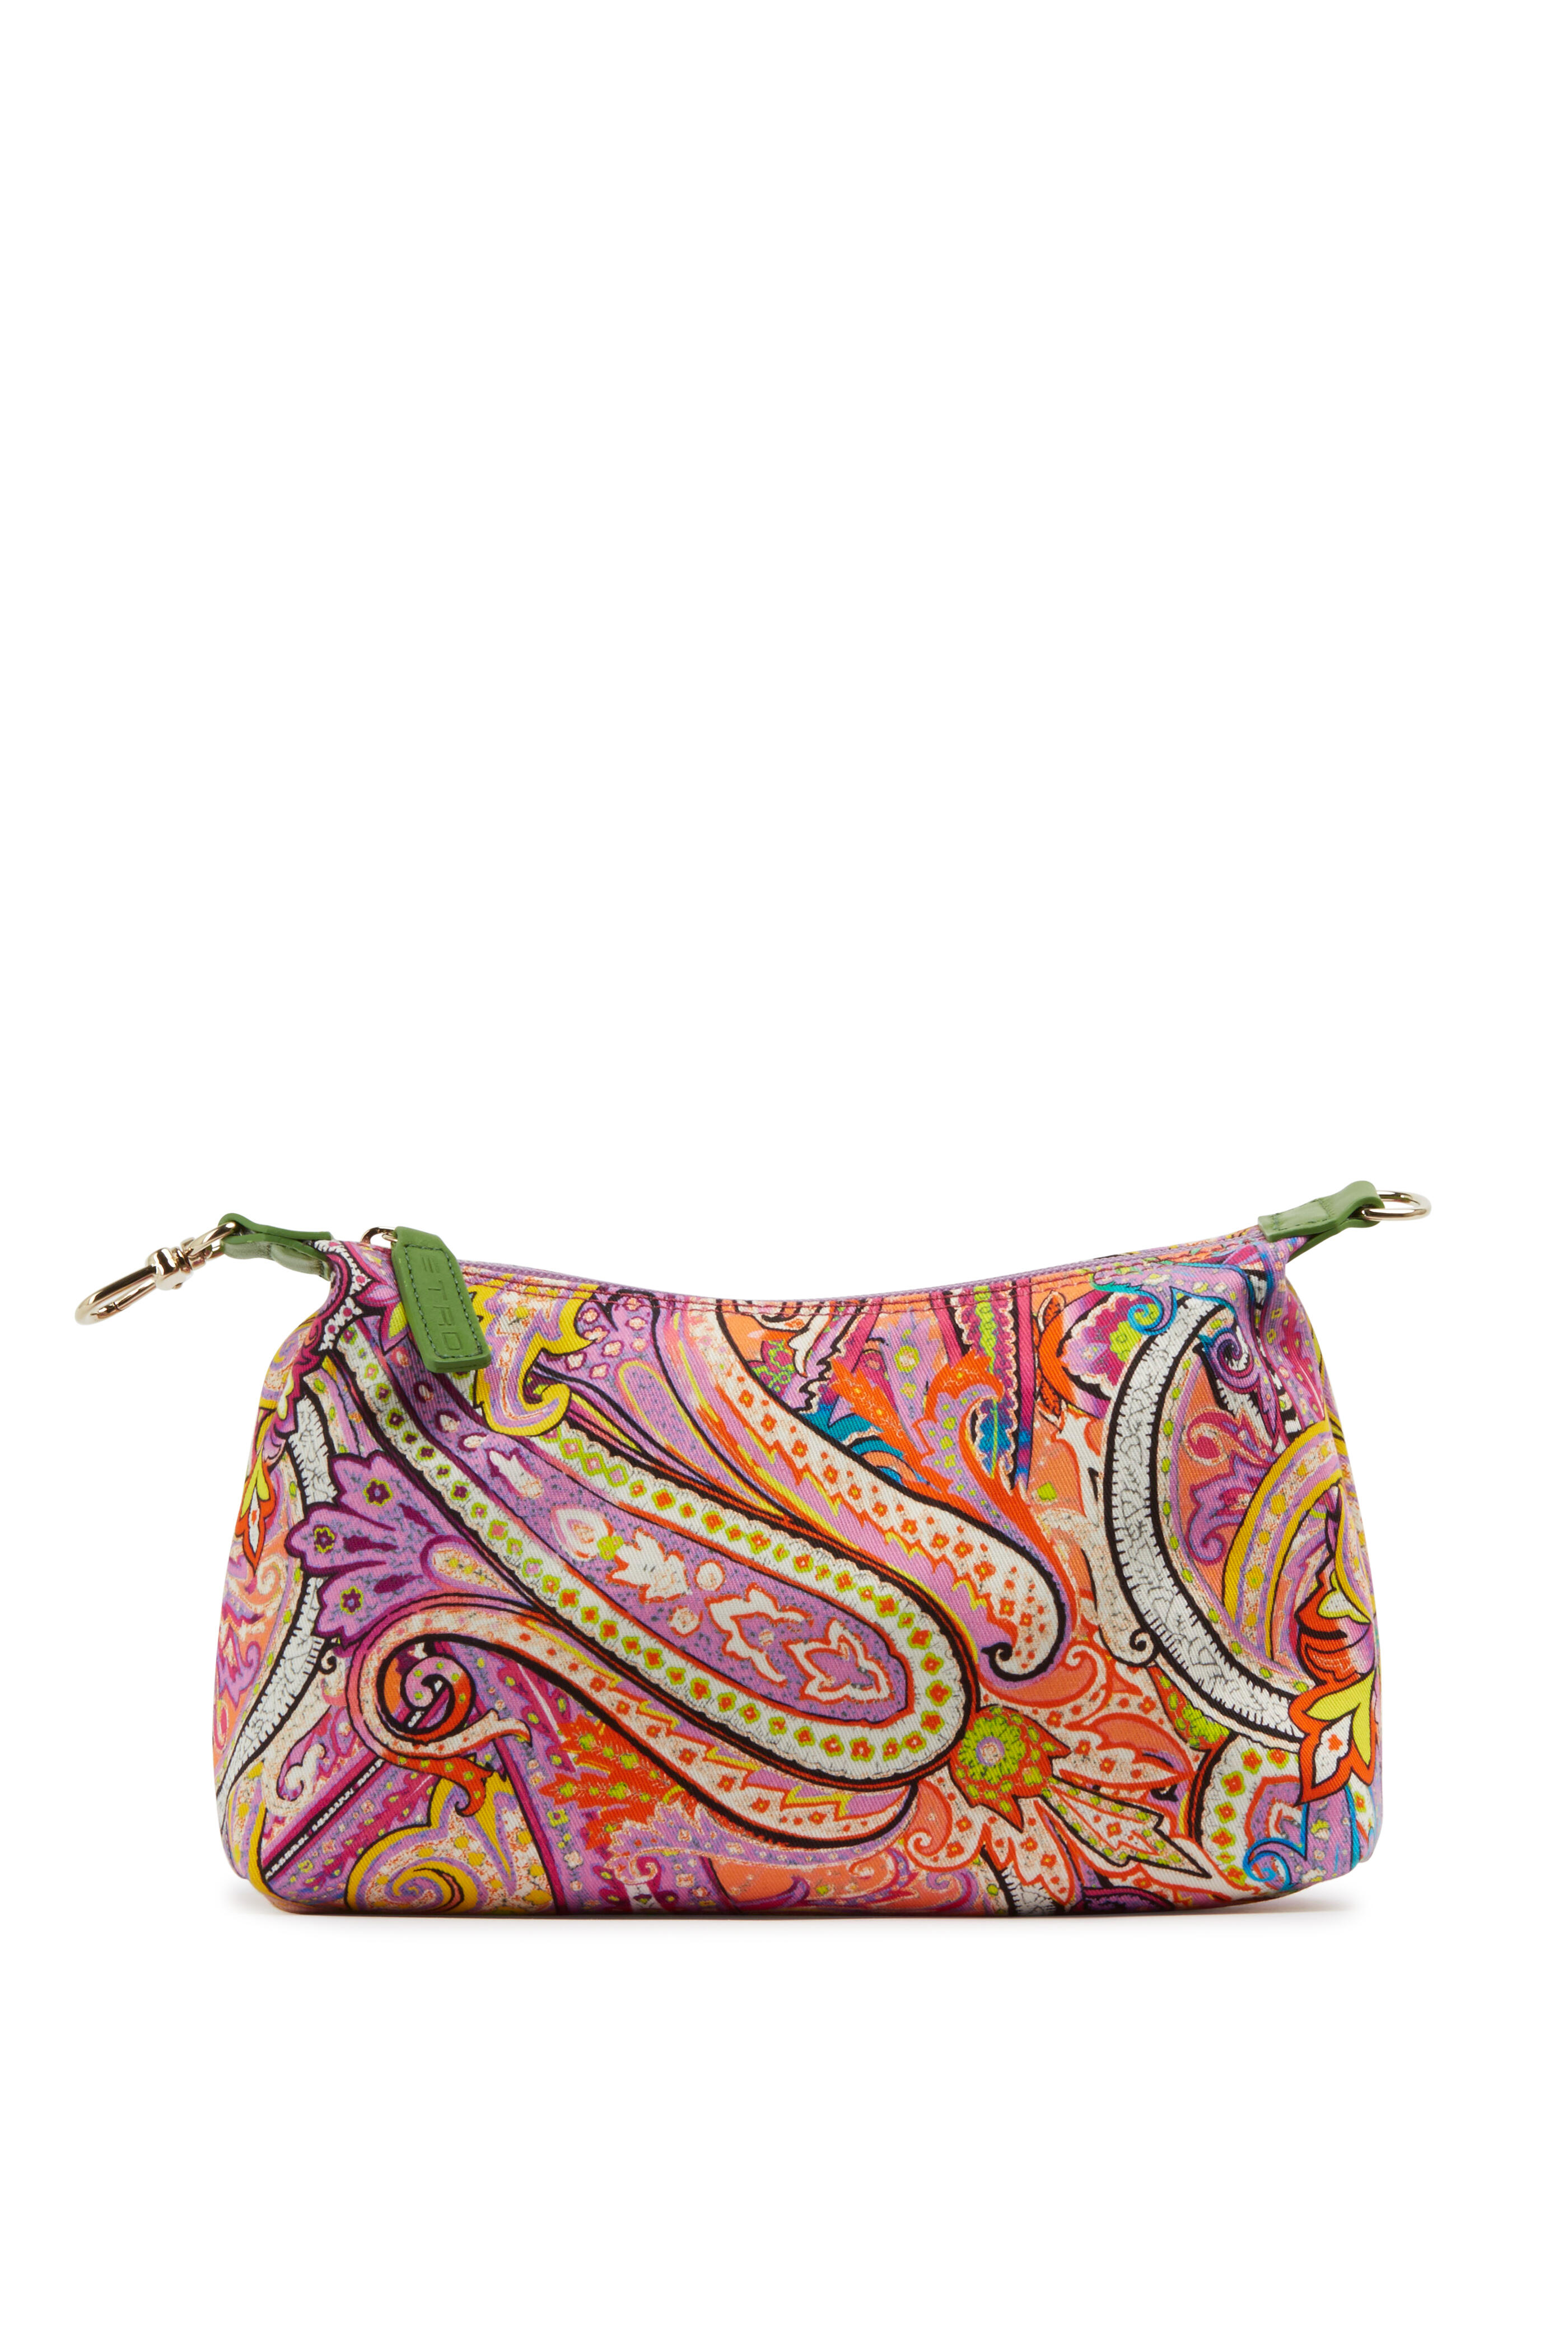 Etro Paisley Stores Multicolored Cosmetic Bag Canvas - Mitchell |